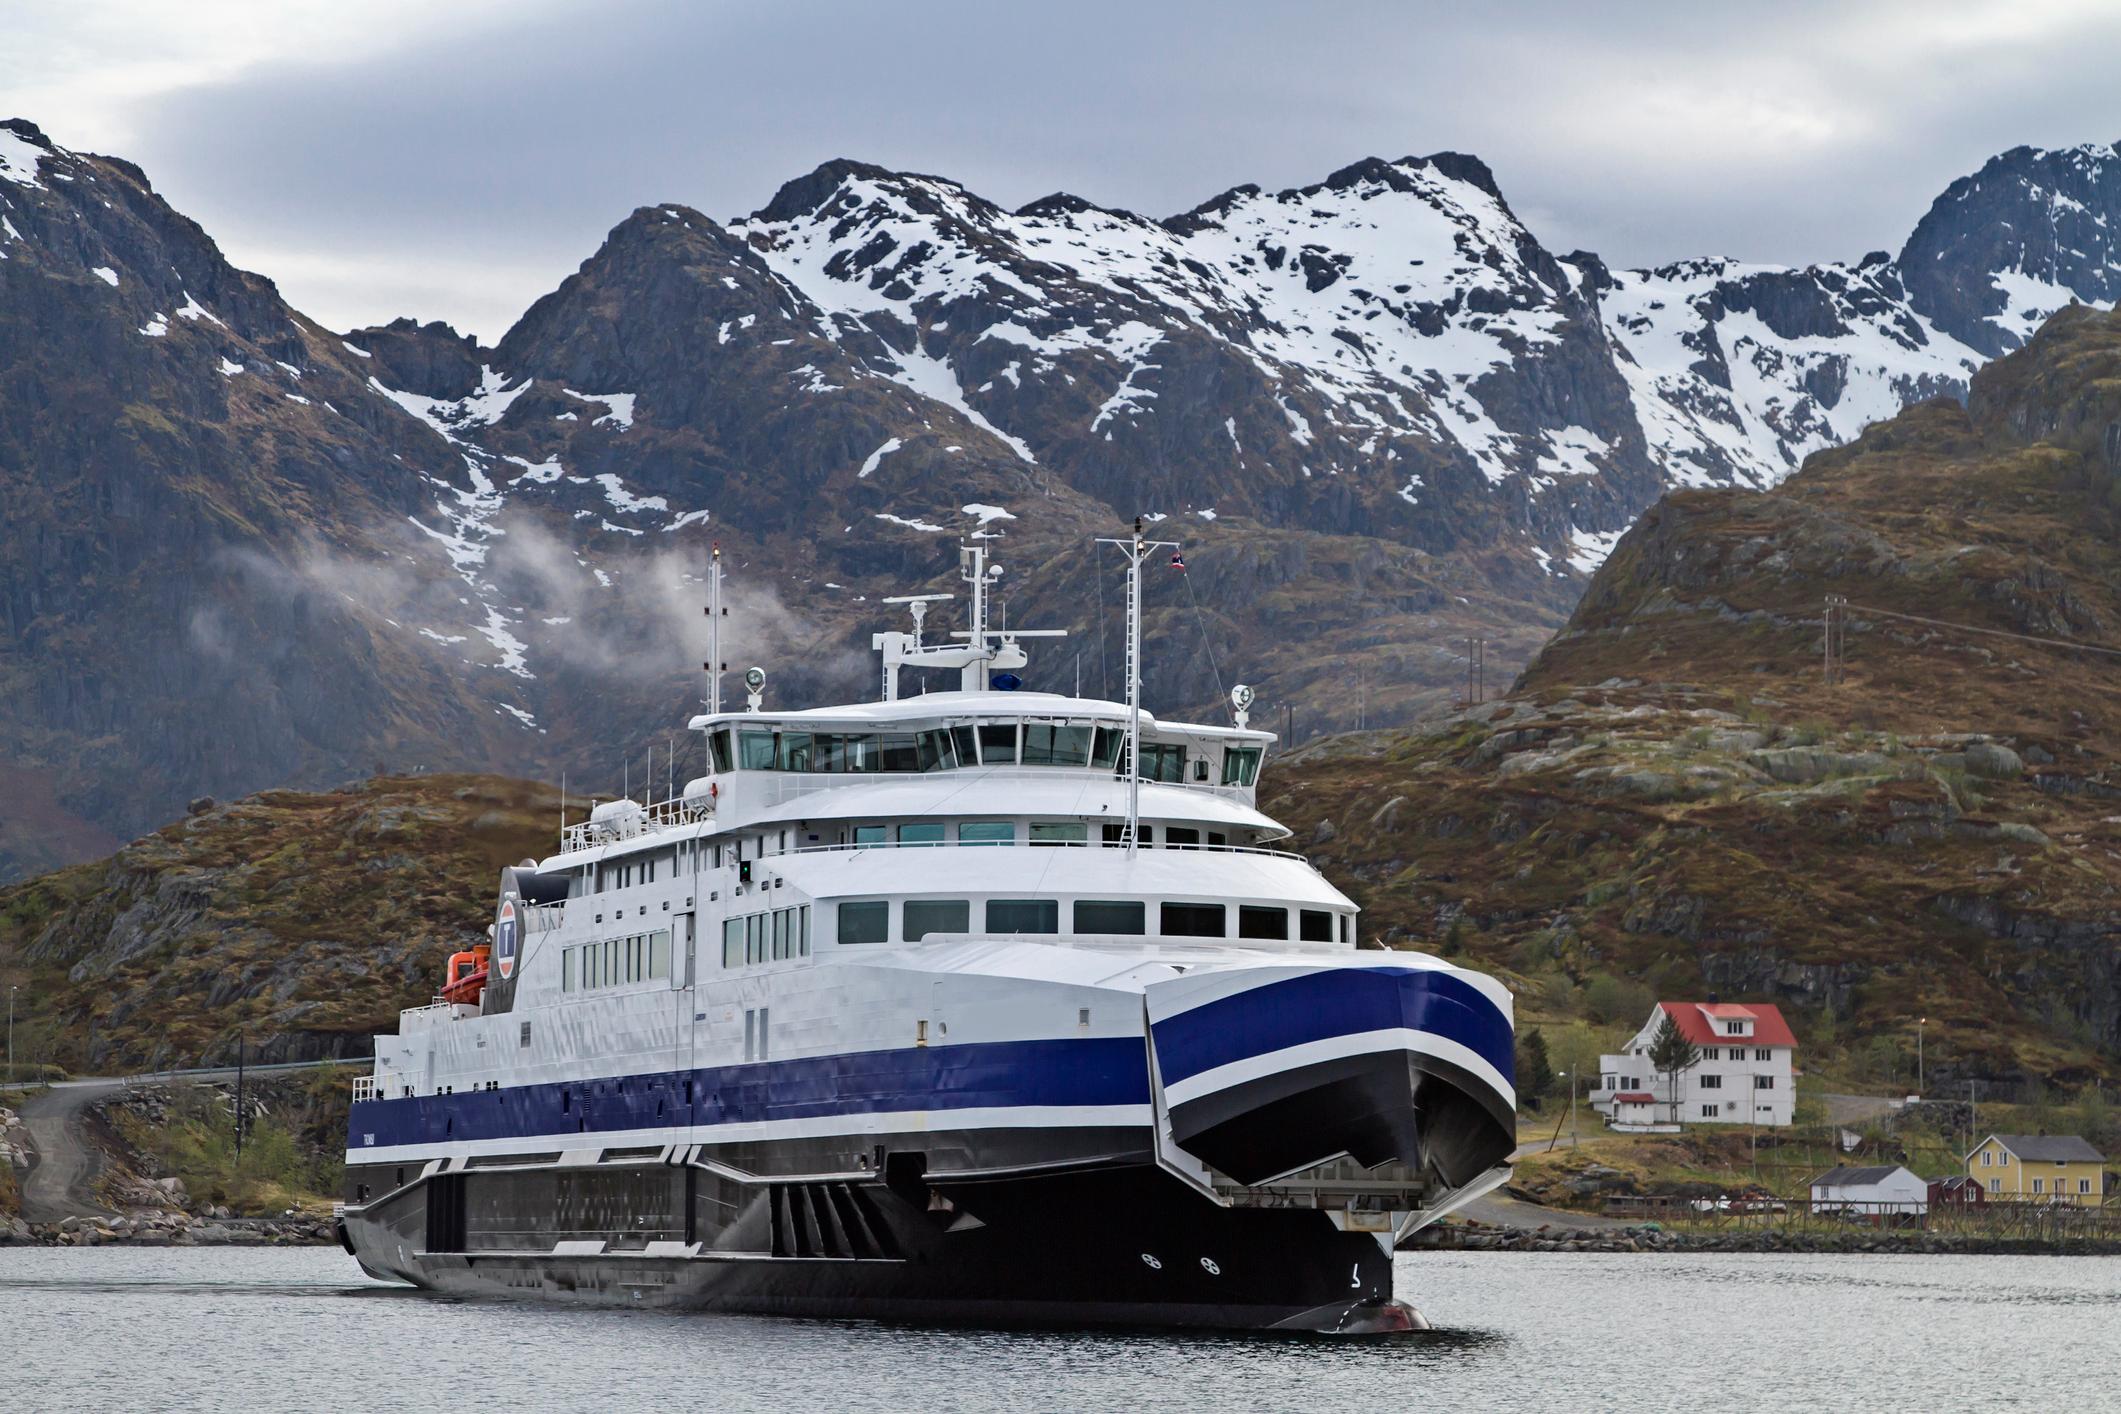 The car ferry from Bodø to Lofoten. Photo: Getty.